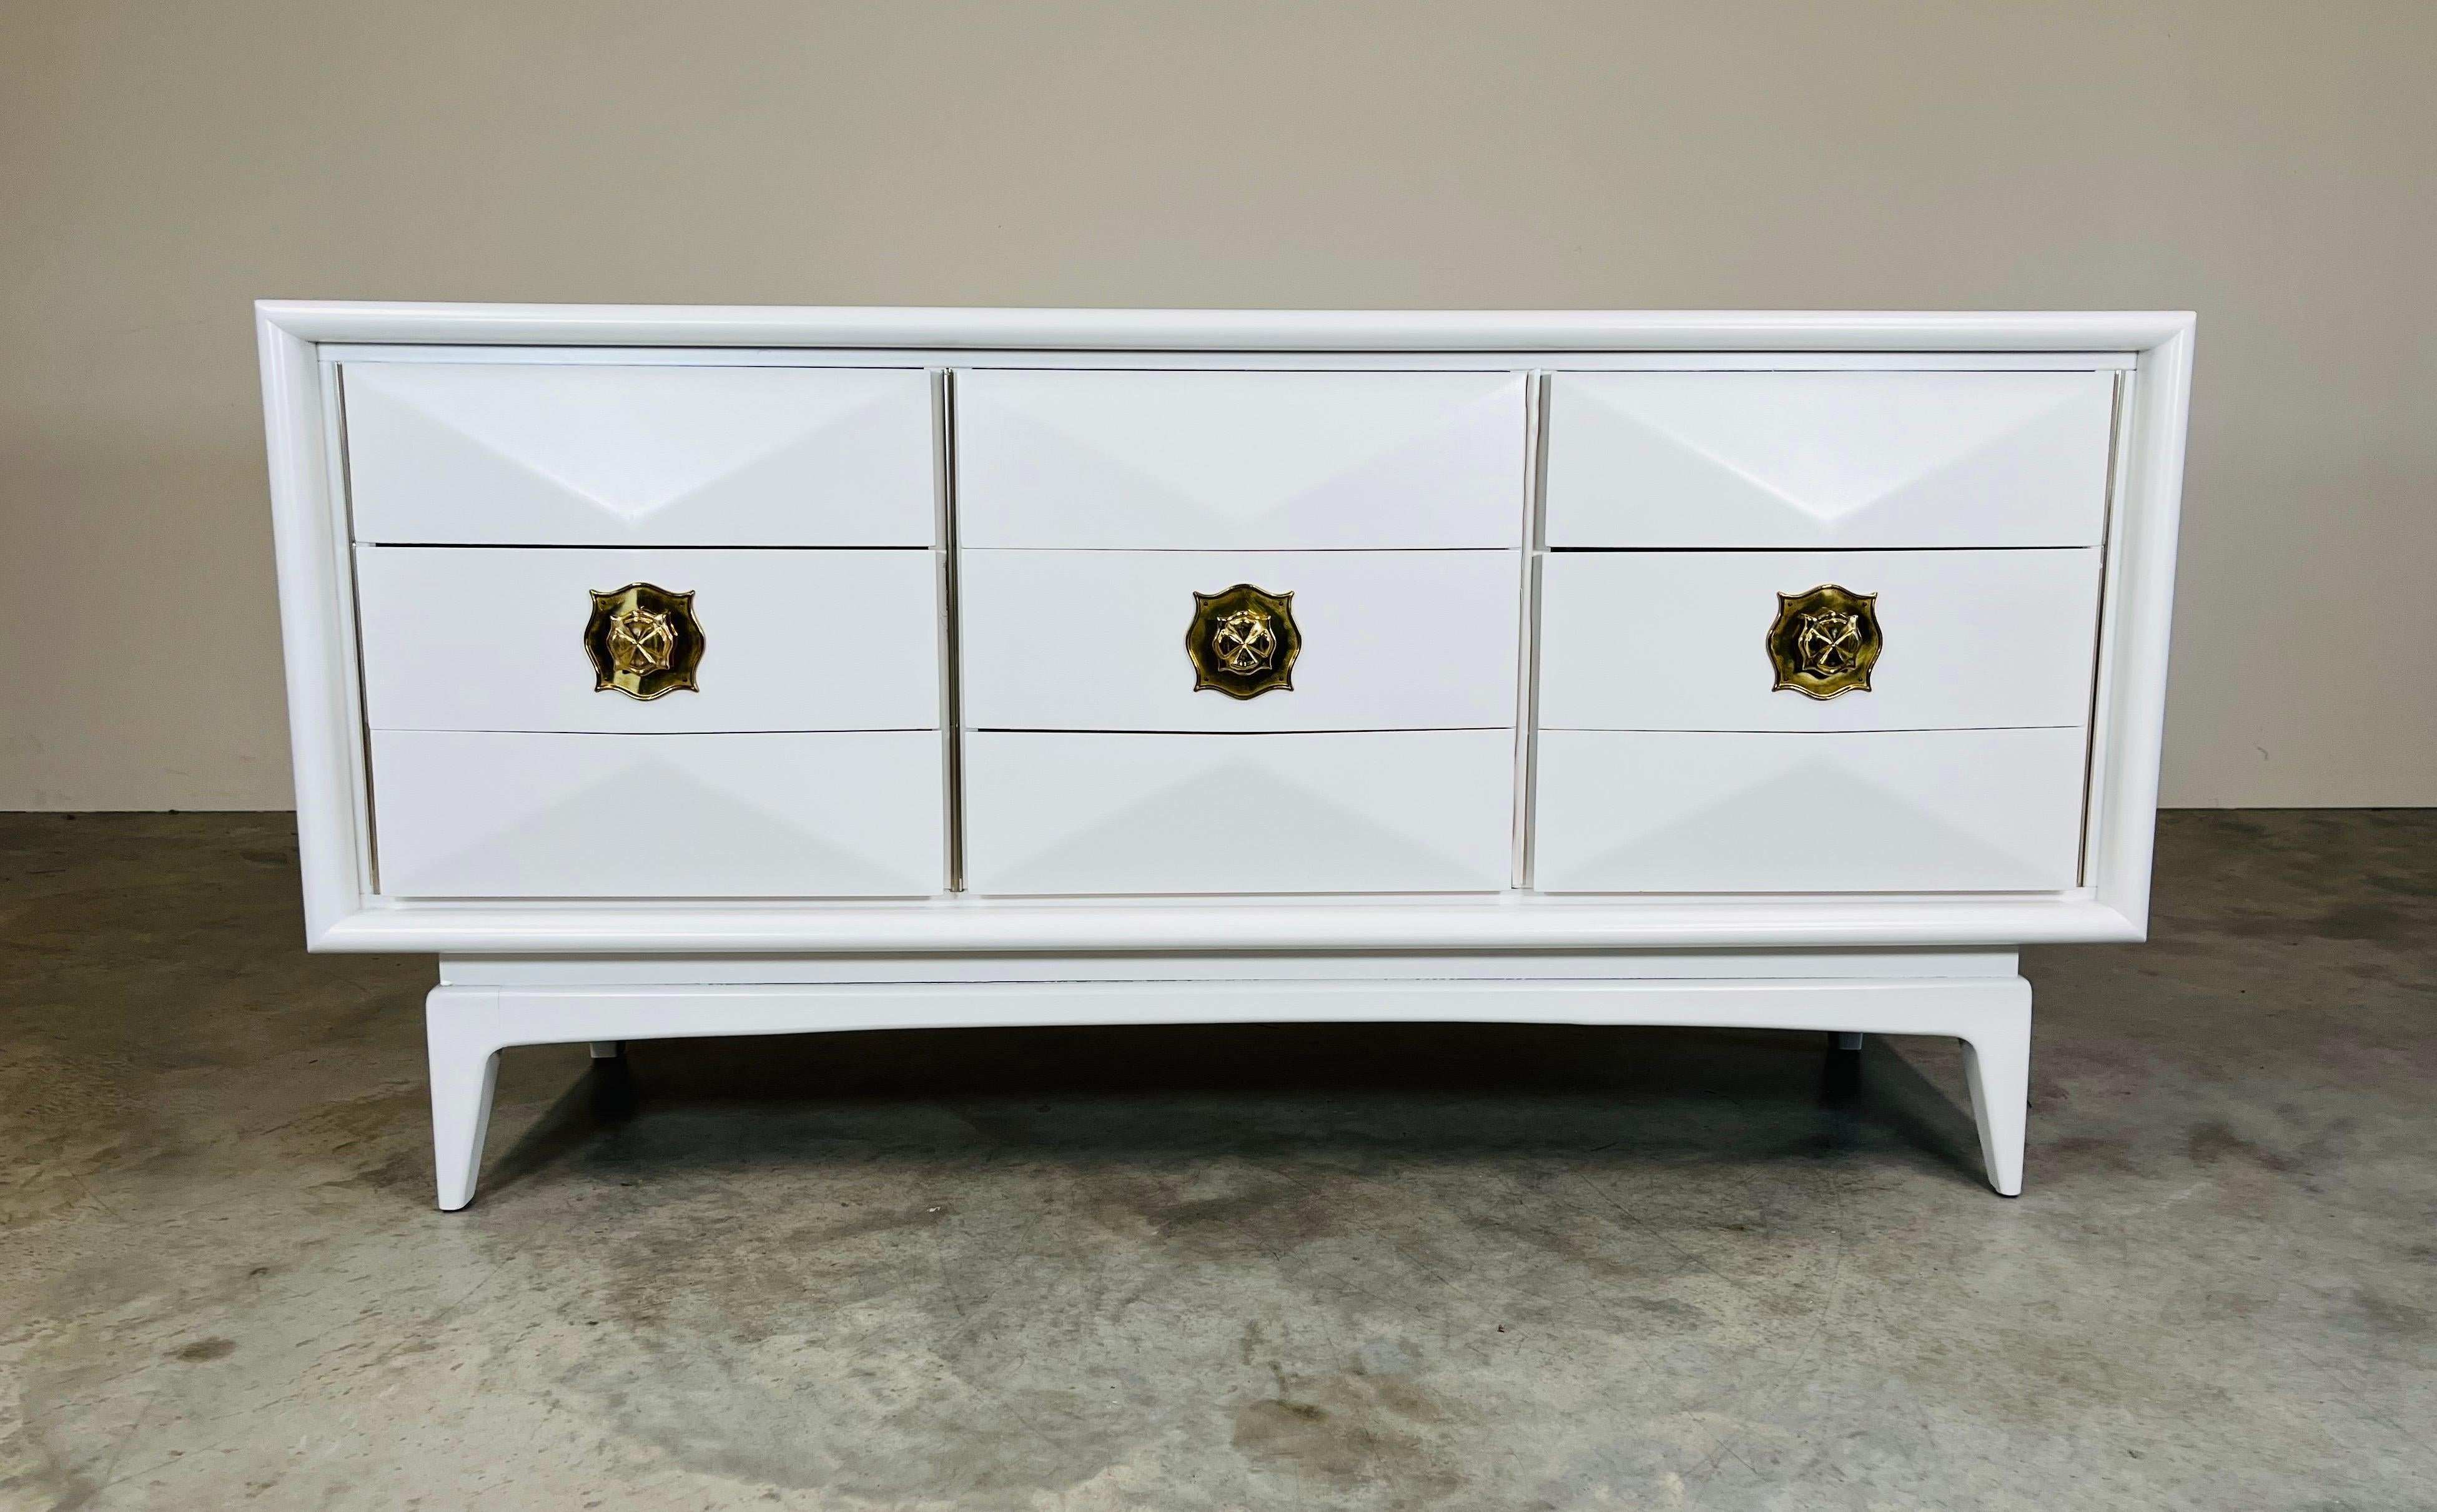 A stunning mid-century modern 9-drawer dresser having sculptural convex diamond front with brass pulls raised on a base with four tapered legs.
In outstanding vintage condition. Cleaned and ready for use!
31x62x19” HWD
NOTE: We also have the